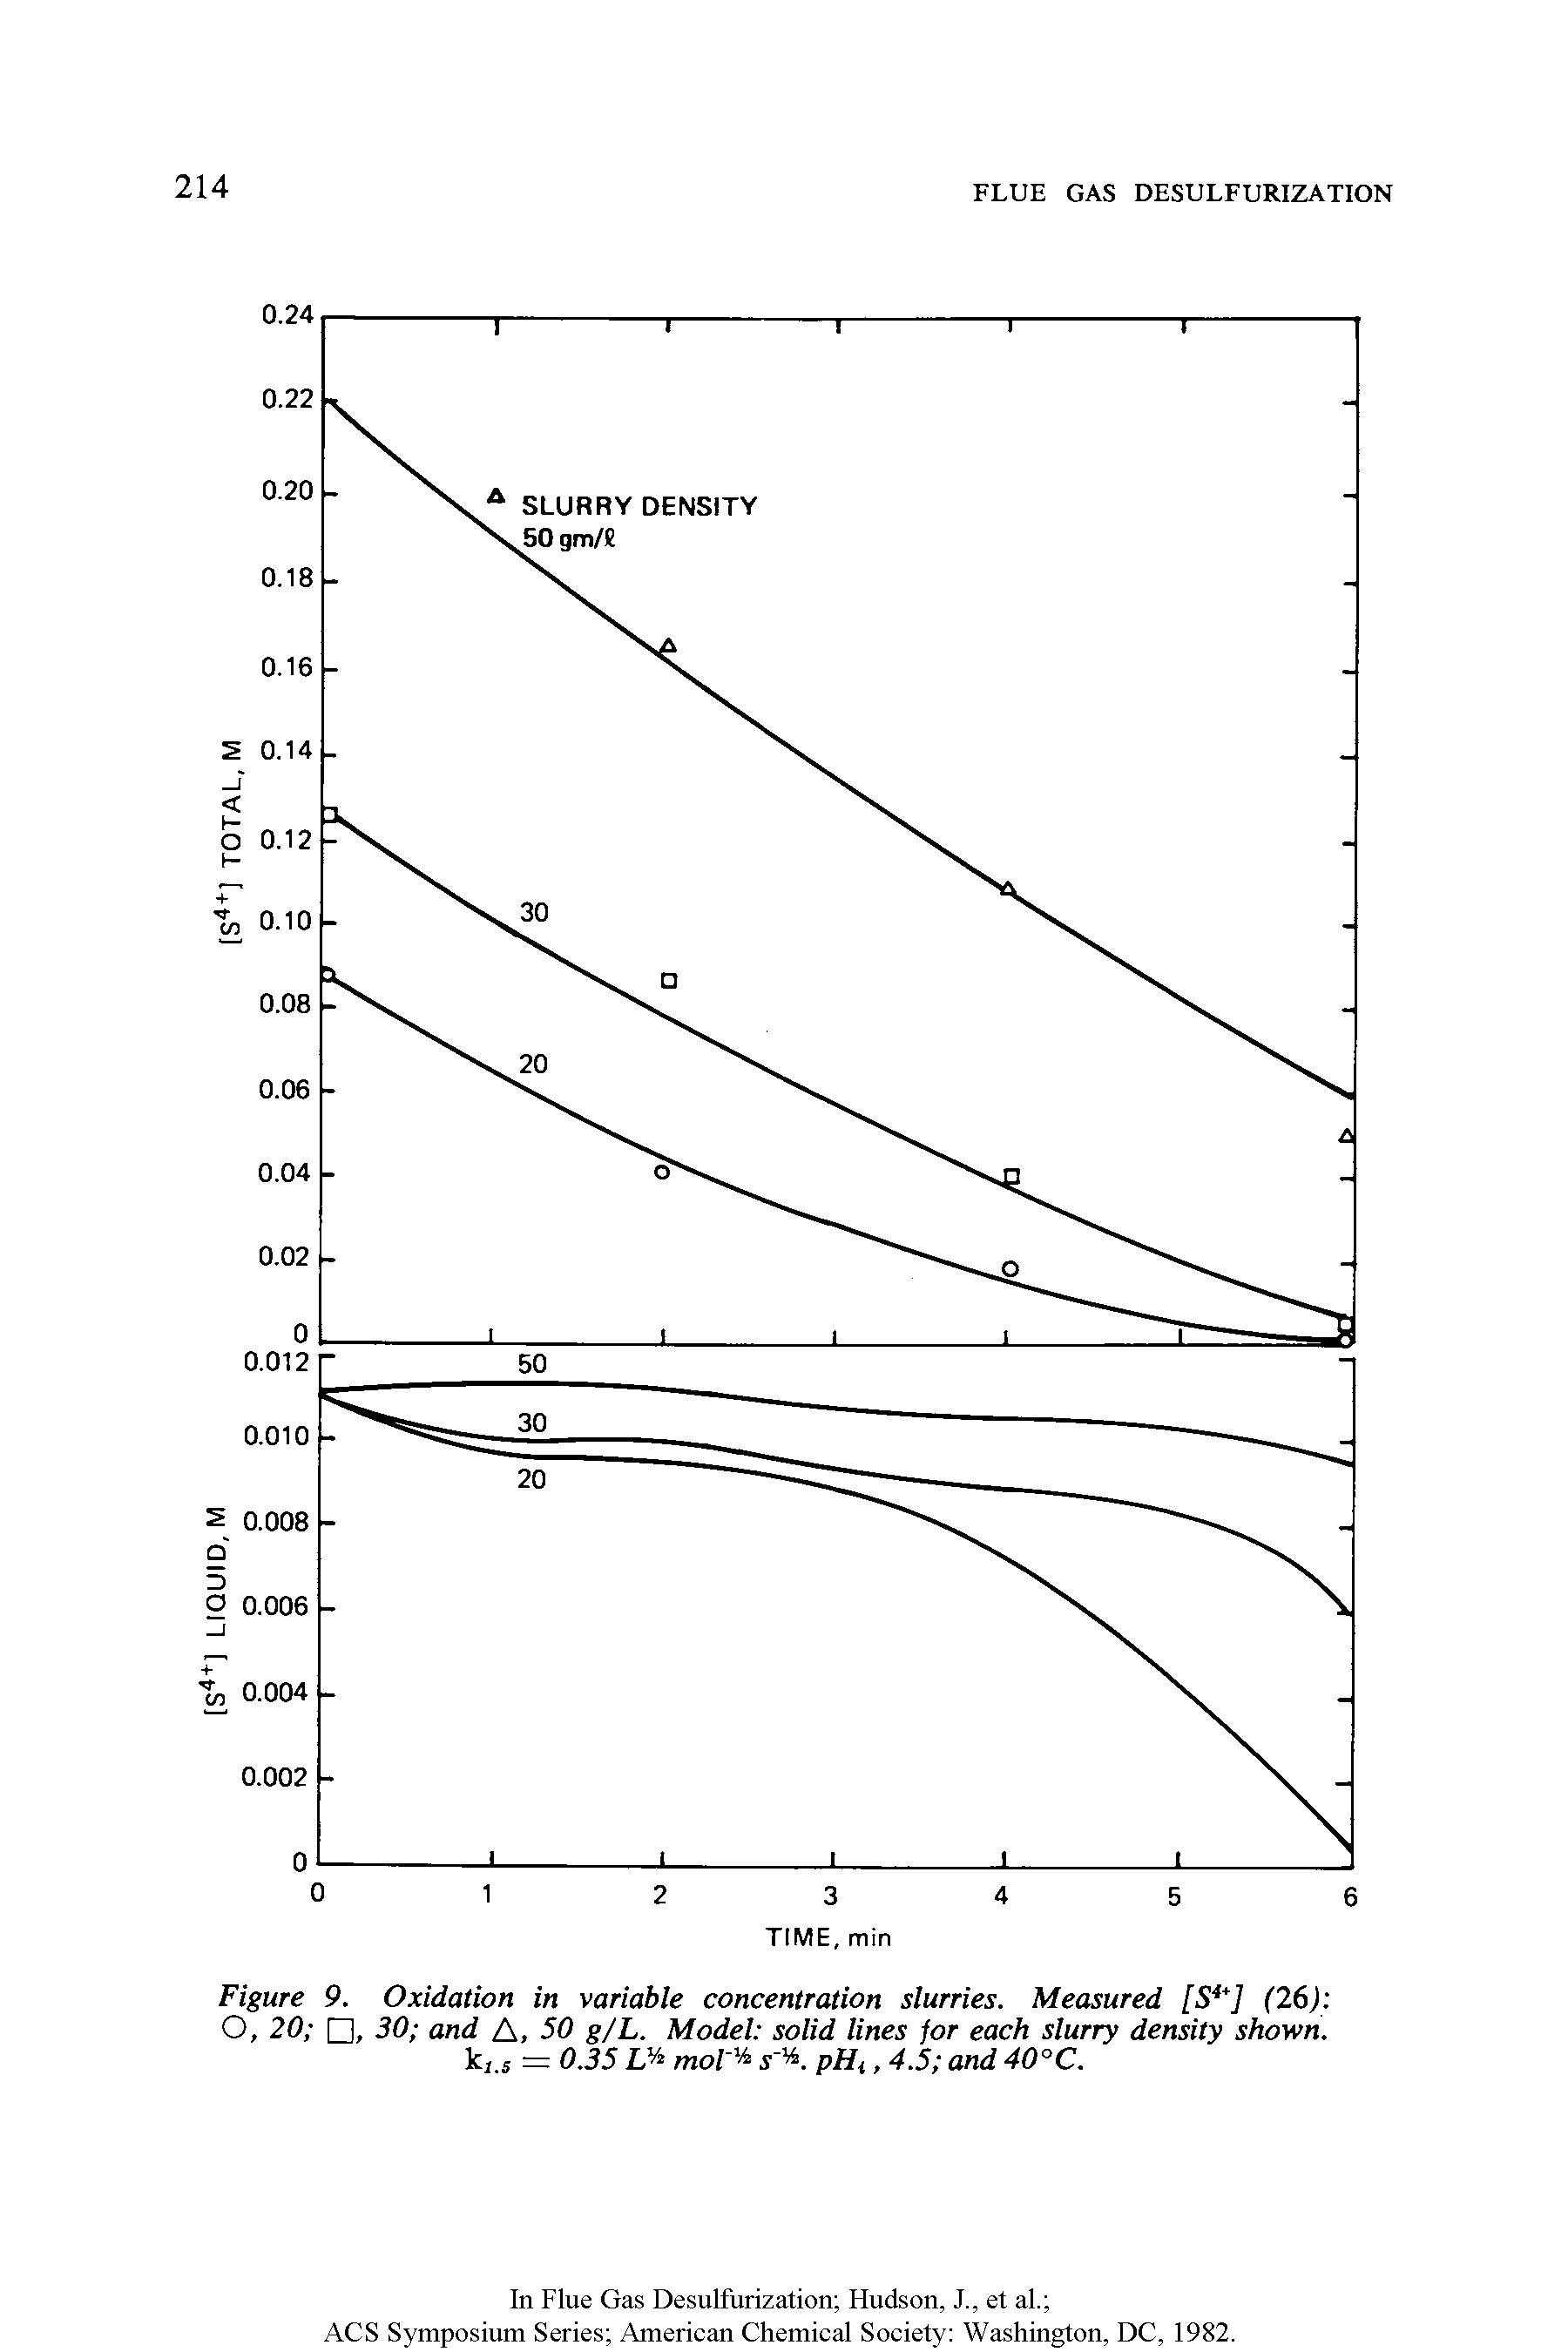 Figure 9. Oxidation in variable concentration slurries. Measured [S4 ] (26) O, 20 , 30 and A, 50 g/L. Model solid lines for each slurry density shown. ki.s = 0.35 L A mol 1 pHt, 4.5 and 40°C.